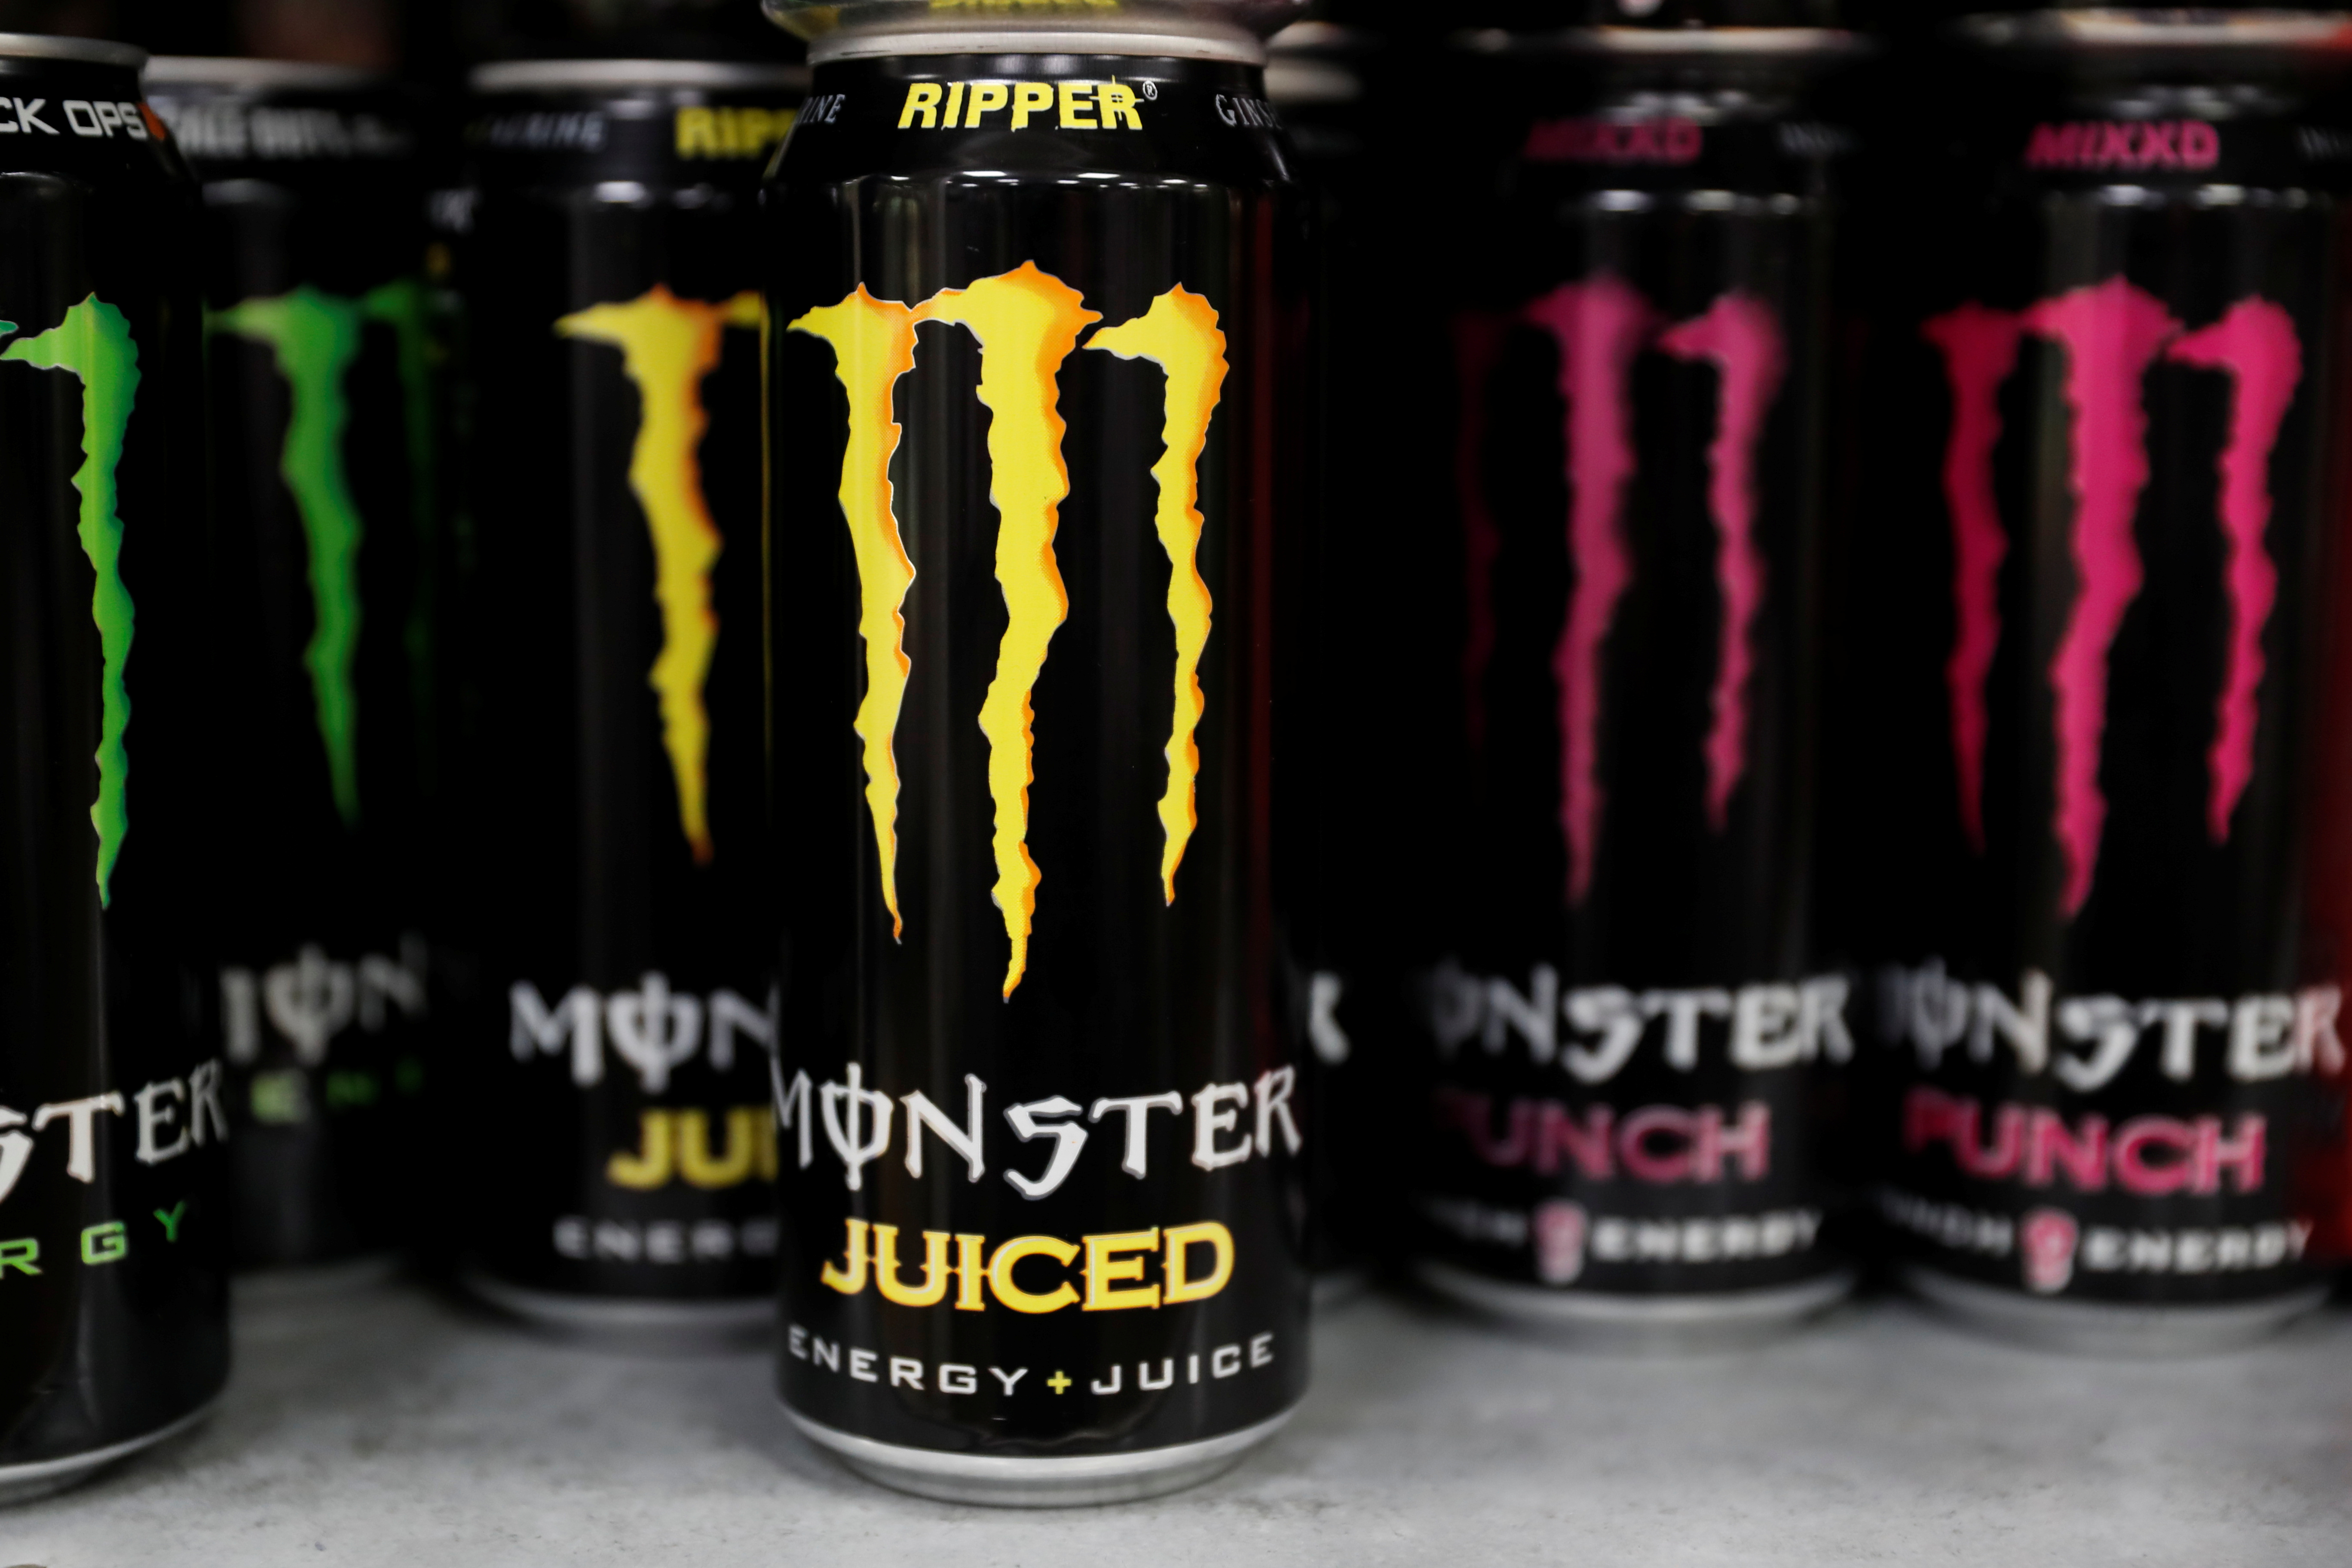 Monster energy drinks are seen for sale in a motorway services shop, Reading